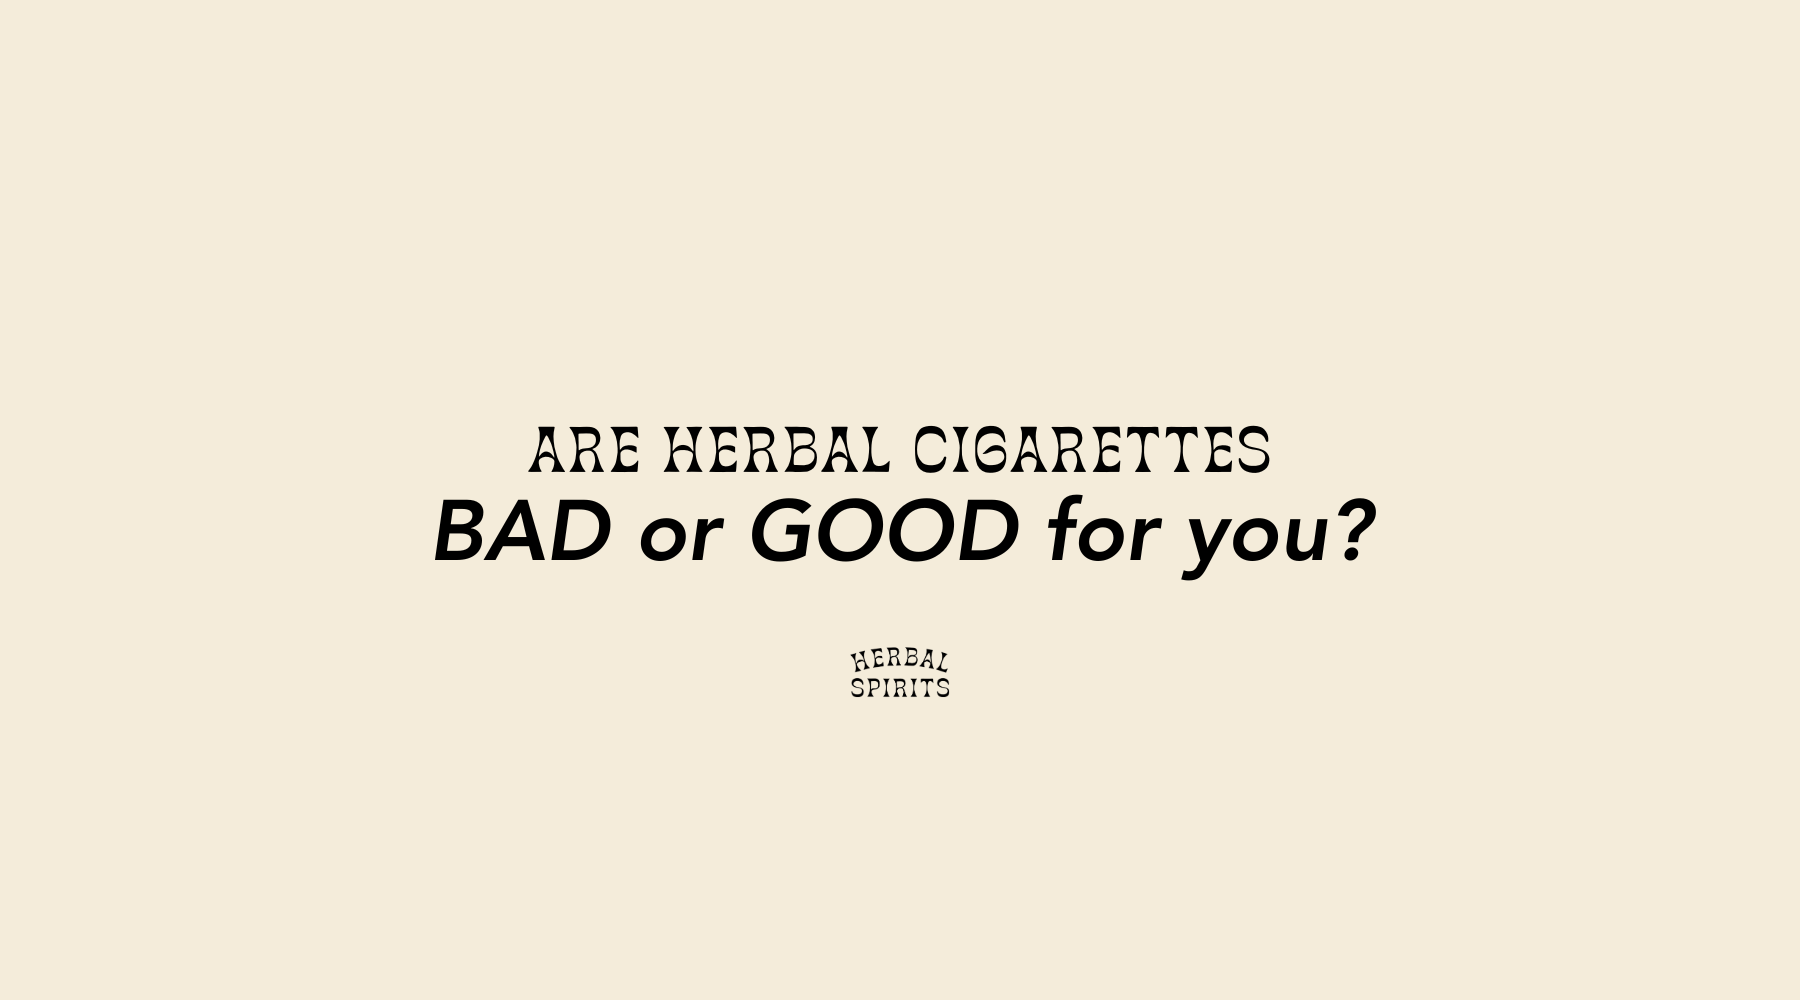 Are herbal cigarettes BAD or GOOD for you?